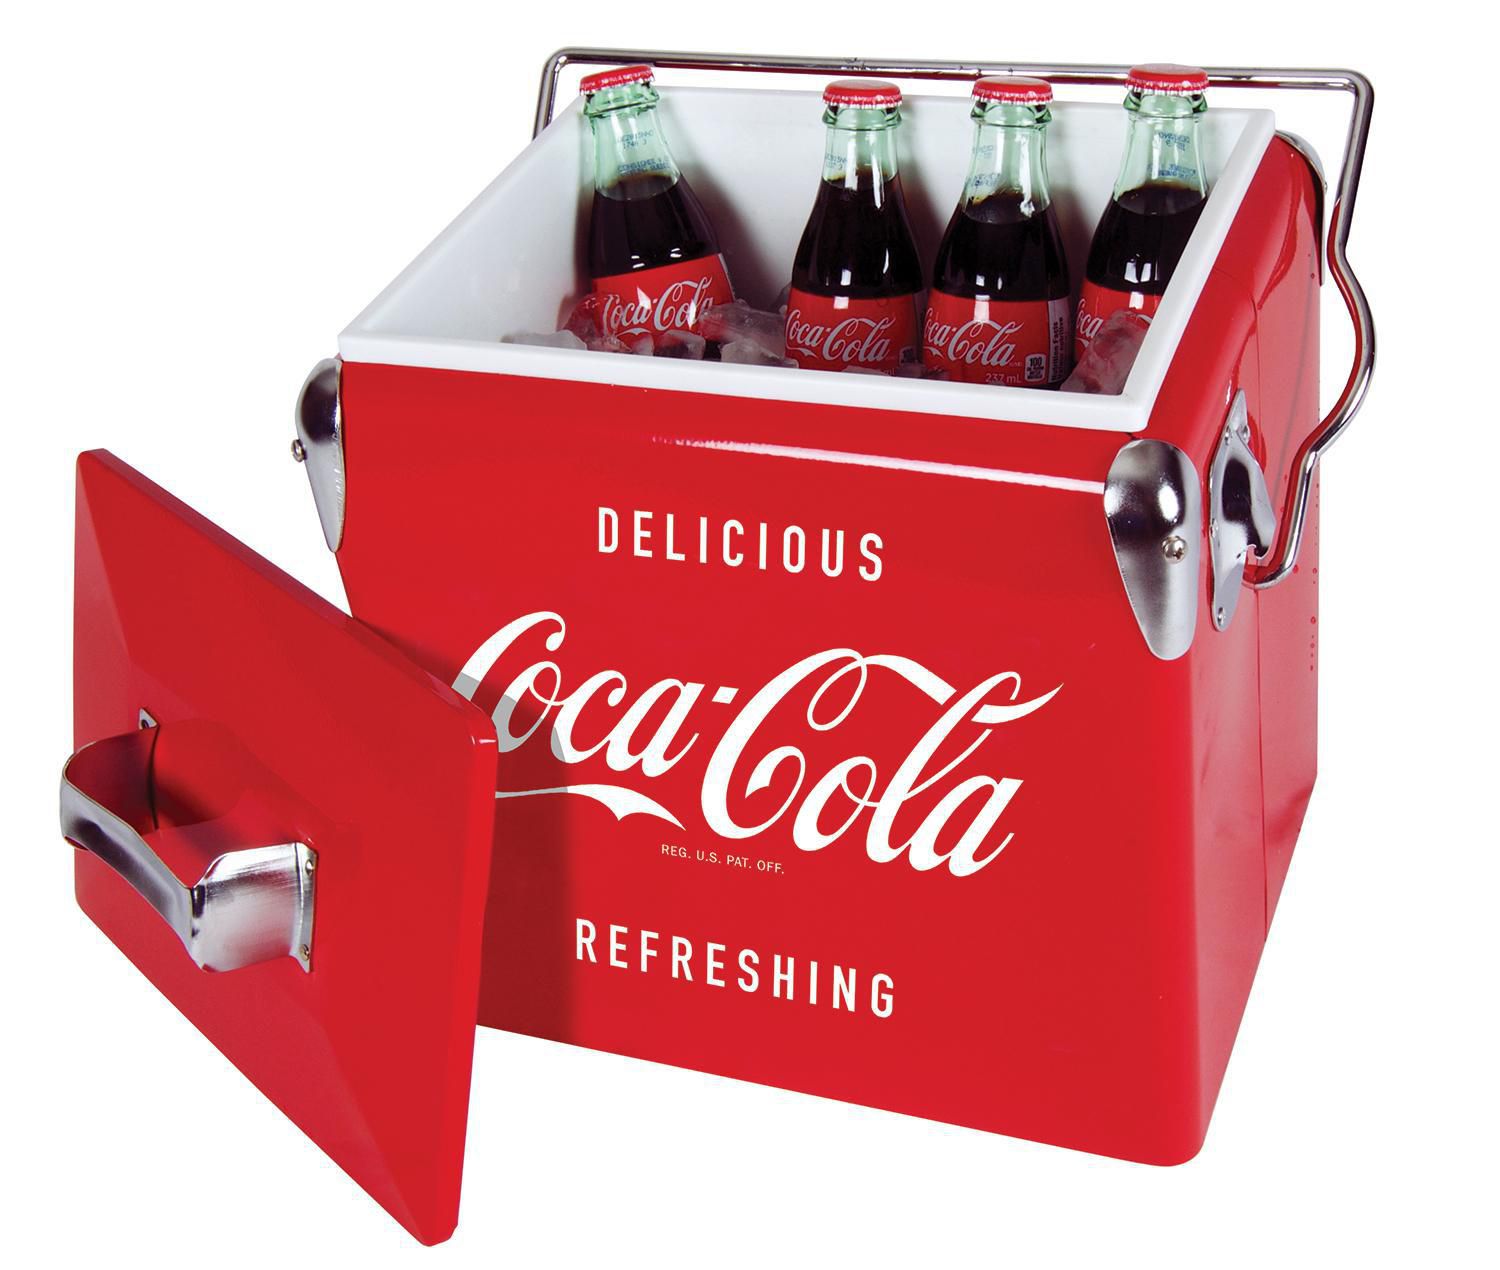 Coca-Cola Retro Ice Chest Cooler with Bottle Opener 13L (14 qt), Red and  Silver